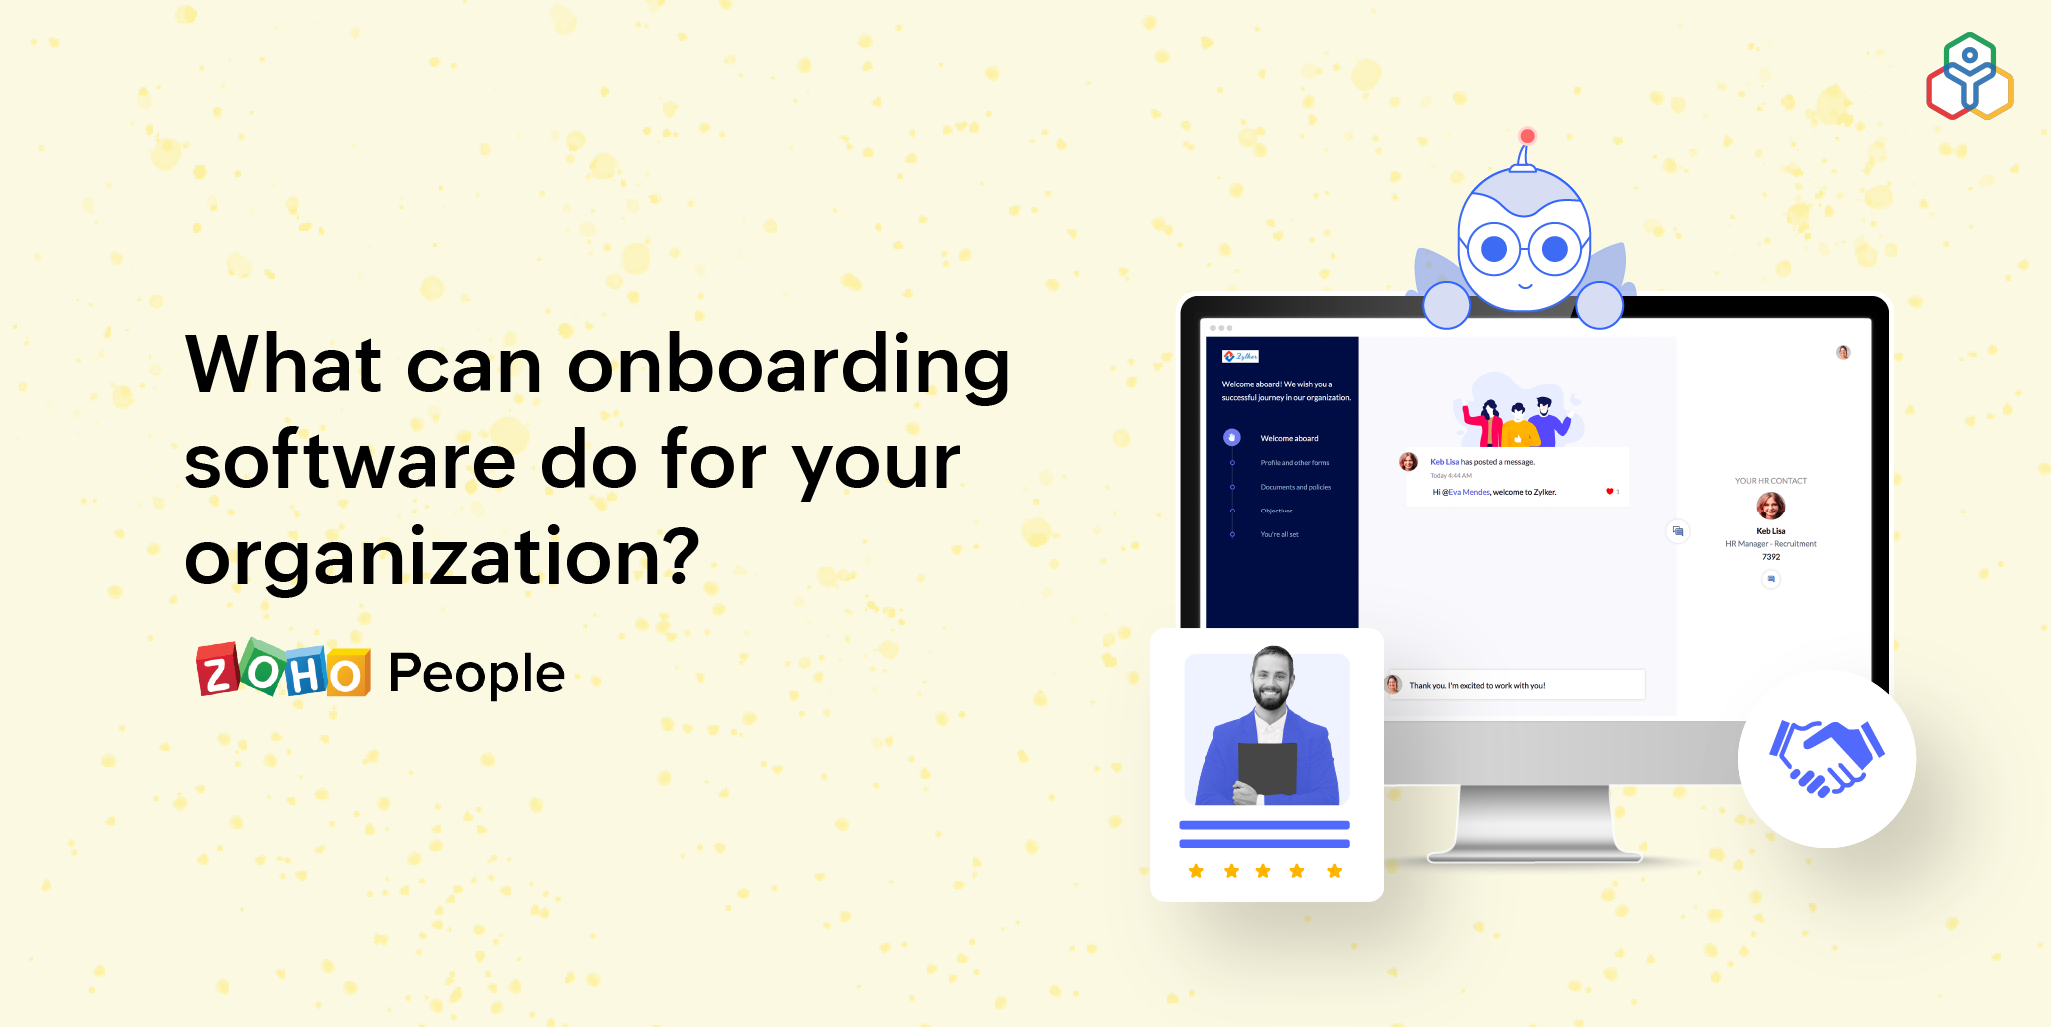 Here's how onboarding software can help your organization